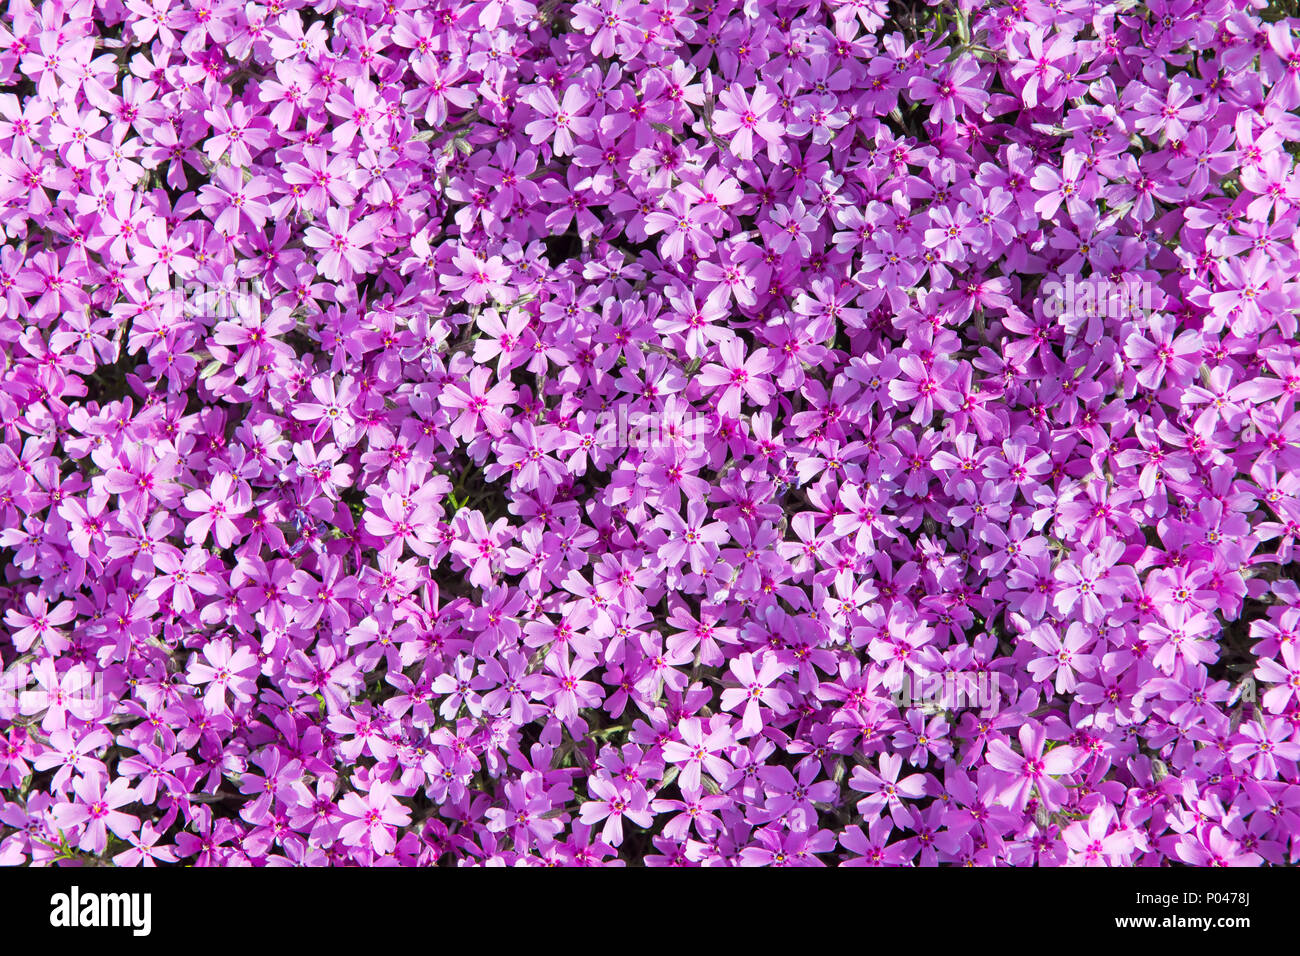 Phlox subulata (known as creeping phlox, moss phlox, moss pink, or mountain phlox) flowers background. Many small purple flowers for background, top v Stock Photo